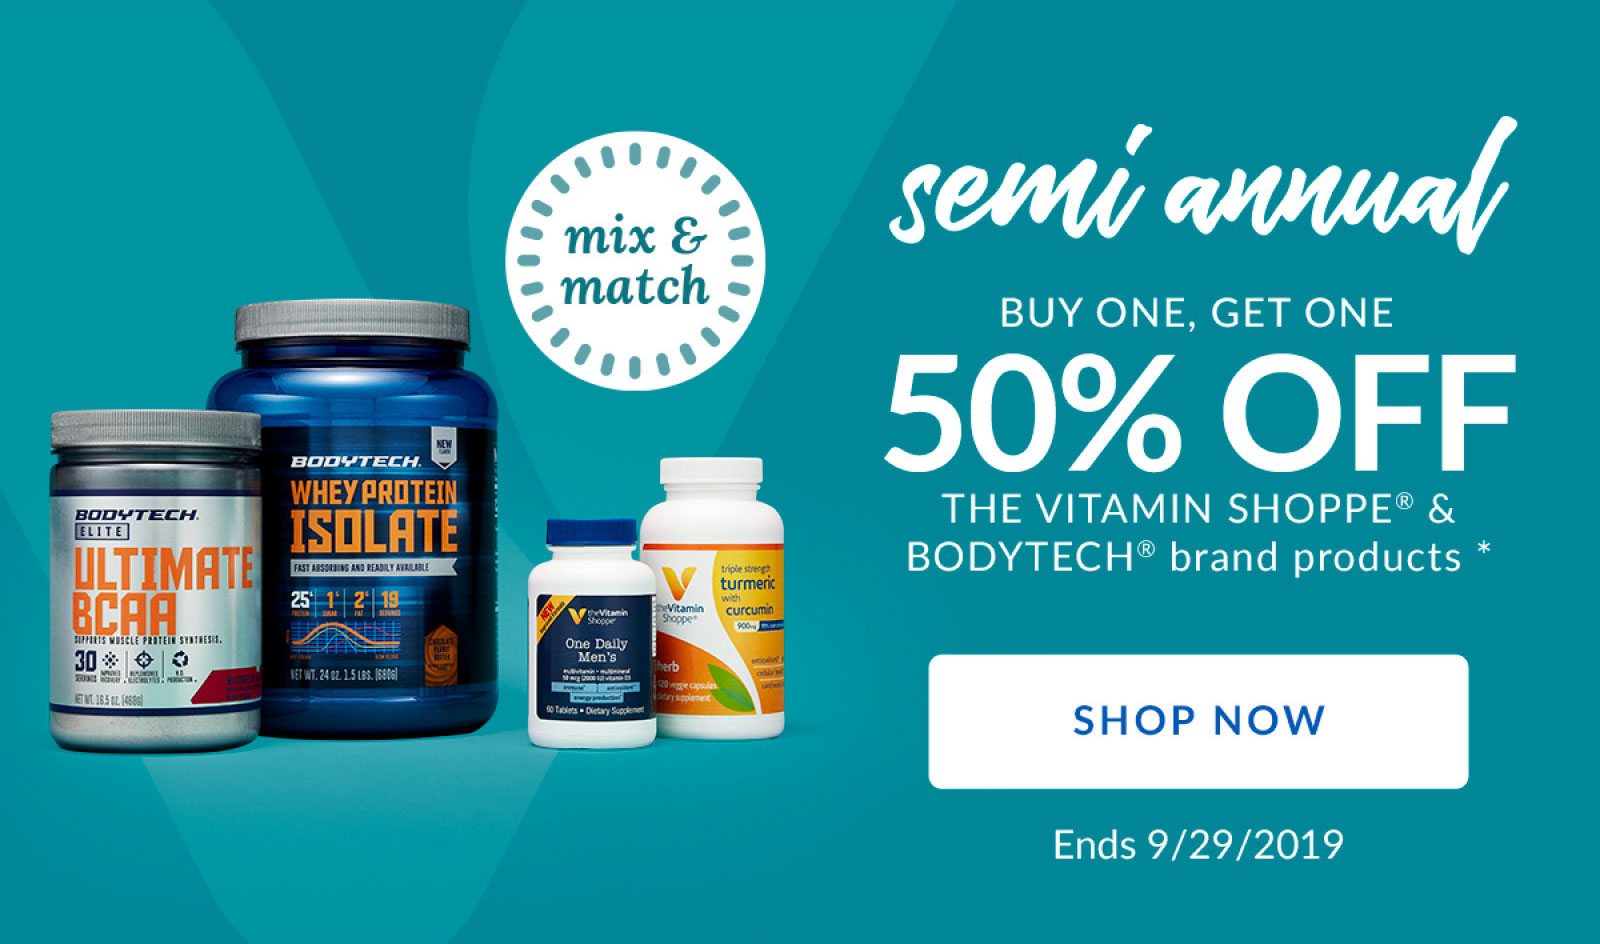 semi annual | BUY ONE, GET ONE 50% OFF THE VITAMIN SHOPPE & BODYTECH brand products * | SHOP NOW | Ends 9/29/2019